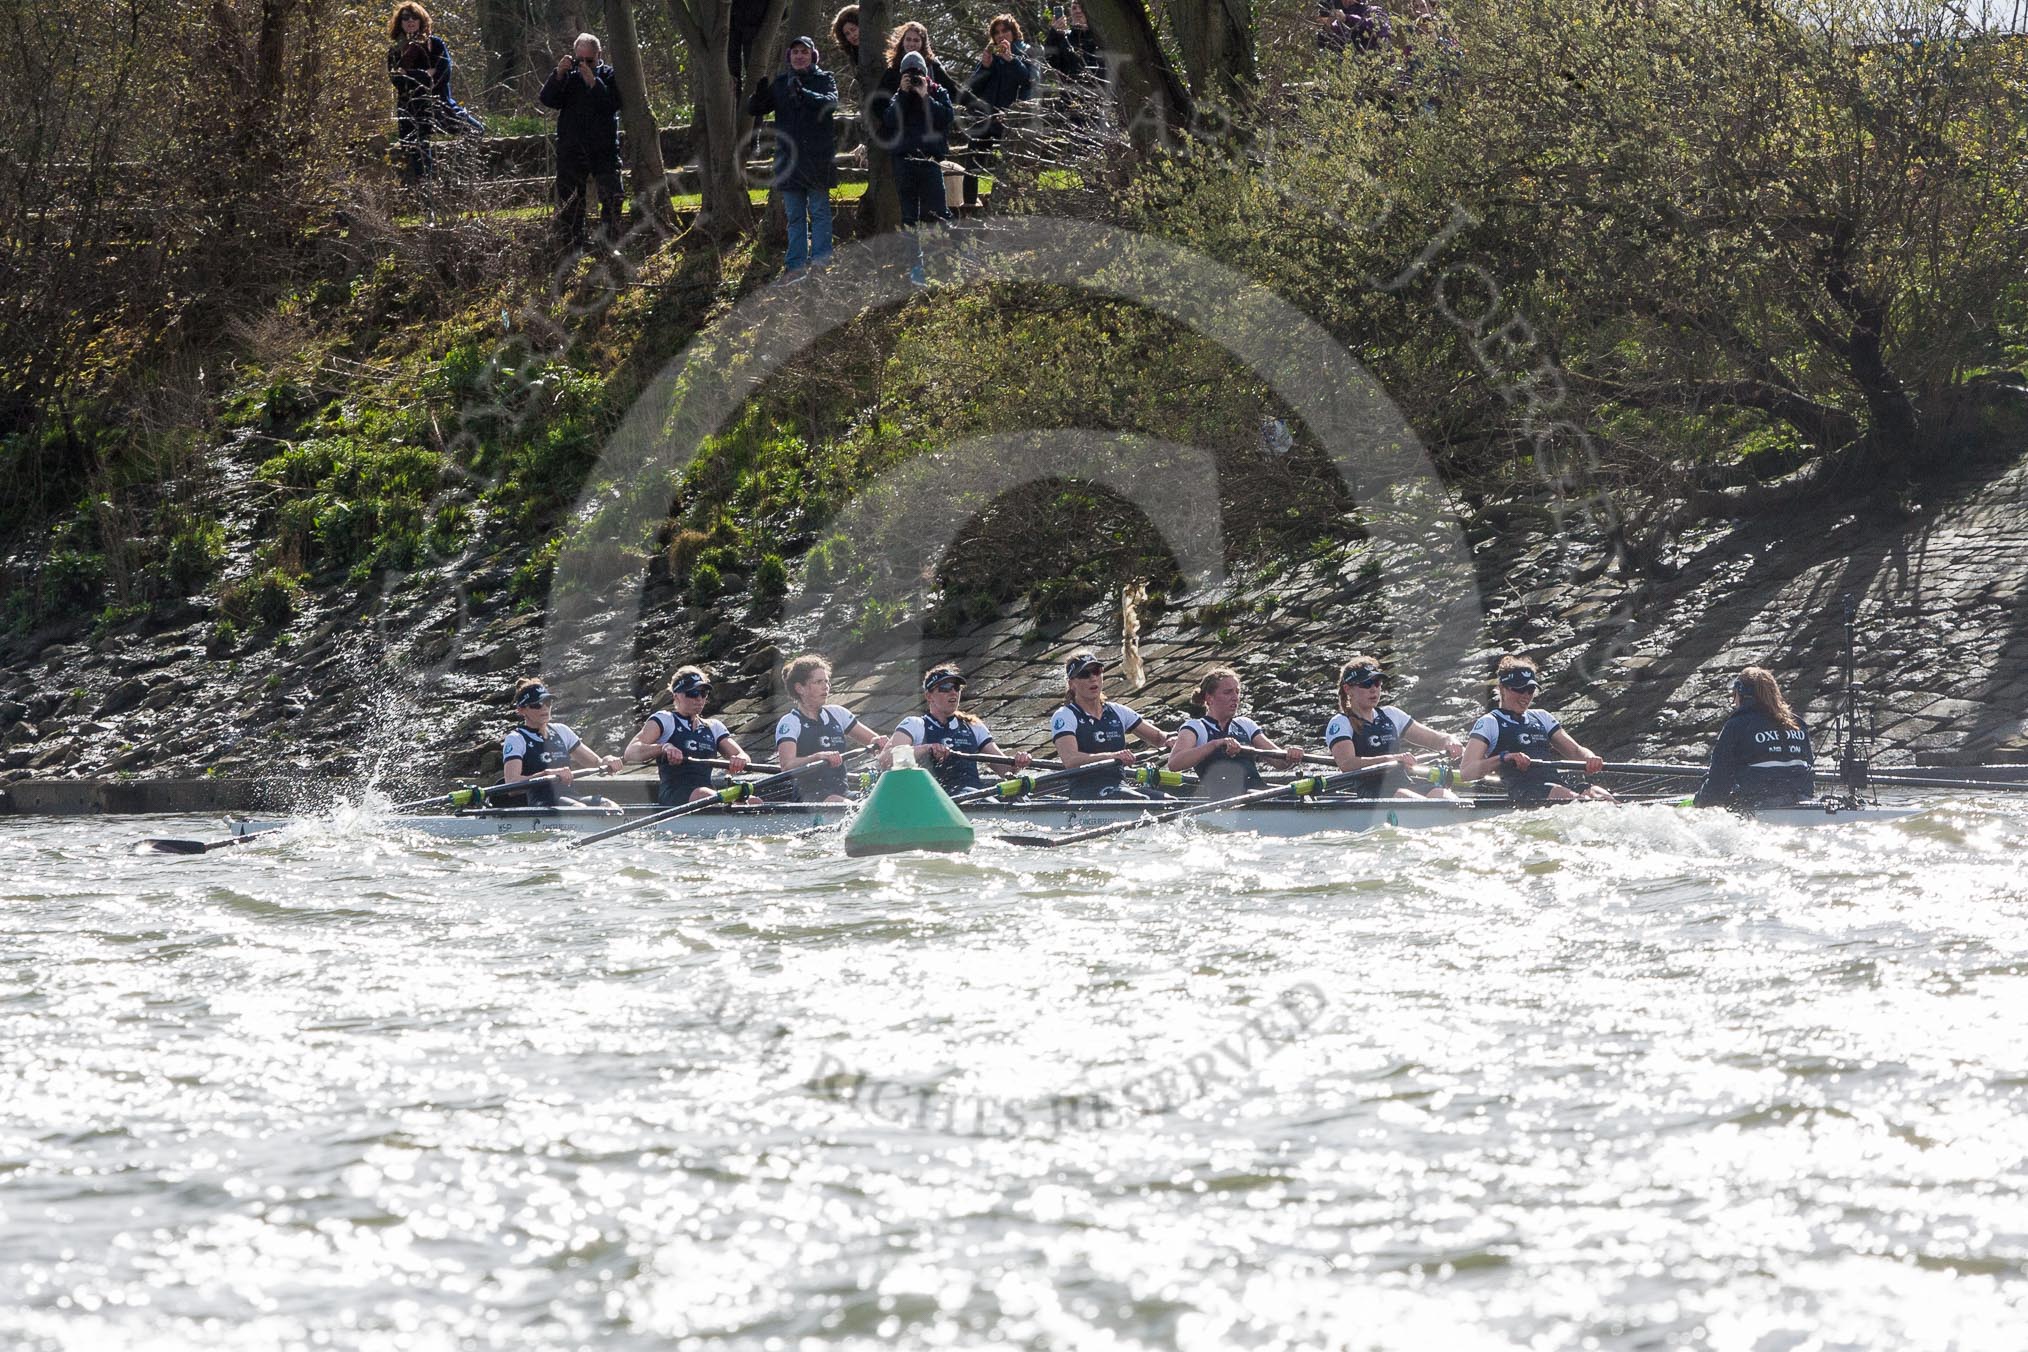 The Boat Race season 2016 -  The Cancer Research Women's Boat Race.
River Thames between Putney Bridge and Mortlake,
London SW15,

United Kingdom,
on 27 March 2016 at 14:26, image #290